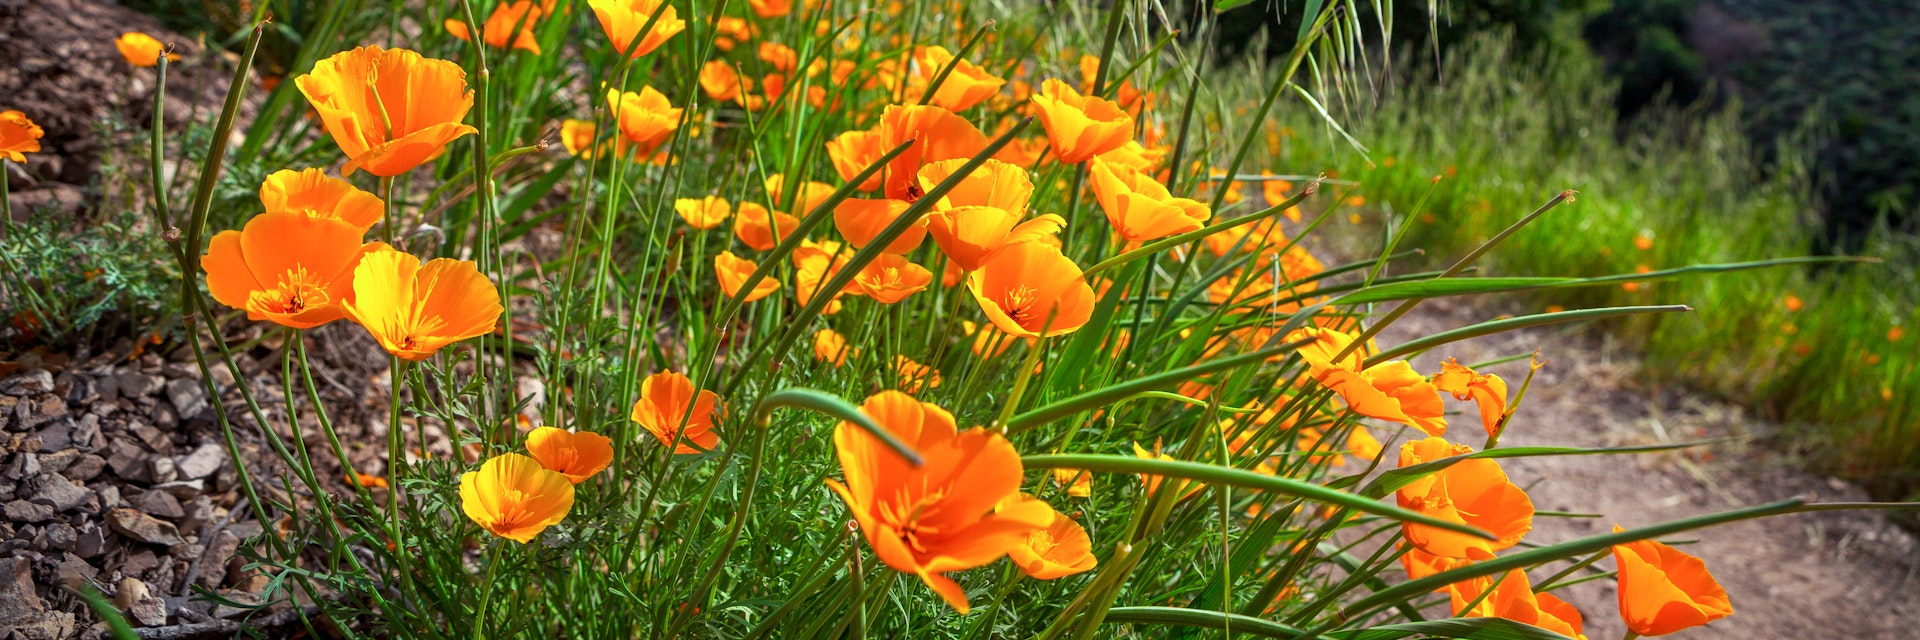 Flashes of golden orange California poppies in bloom along the Grass Mountain Trail into Los Padres National Forest. Near the peak of the April bloom in 2016, with many flowers seen going to seed with their elongated green seed pods in the foreground. The Grass Mountain peak looms in the background with patches of orange poppy blooms against the green grasses of the exposed slope.